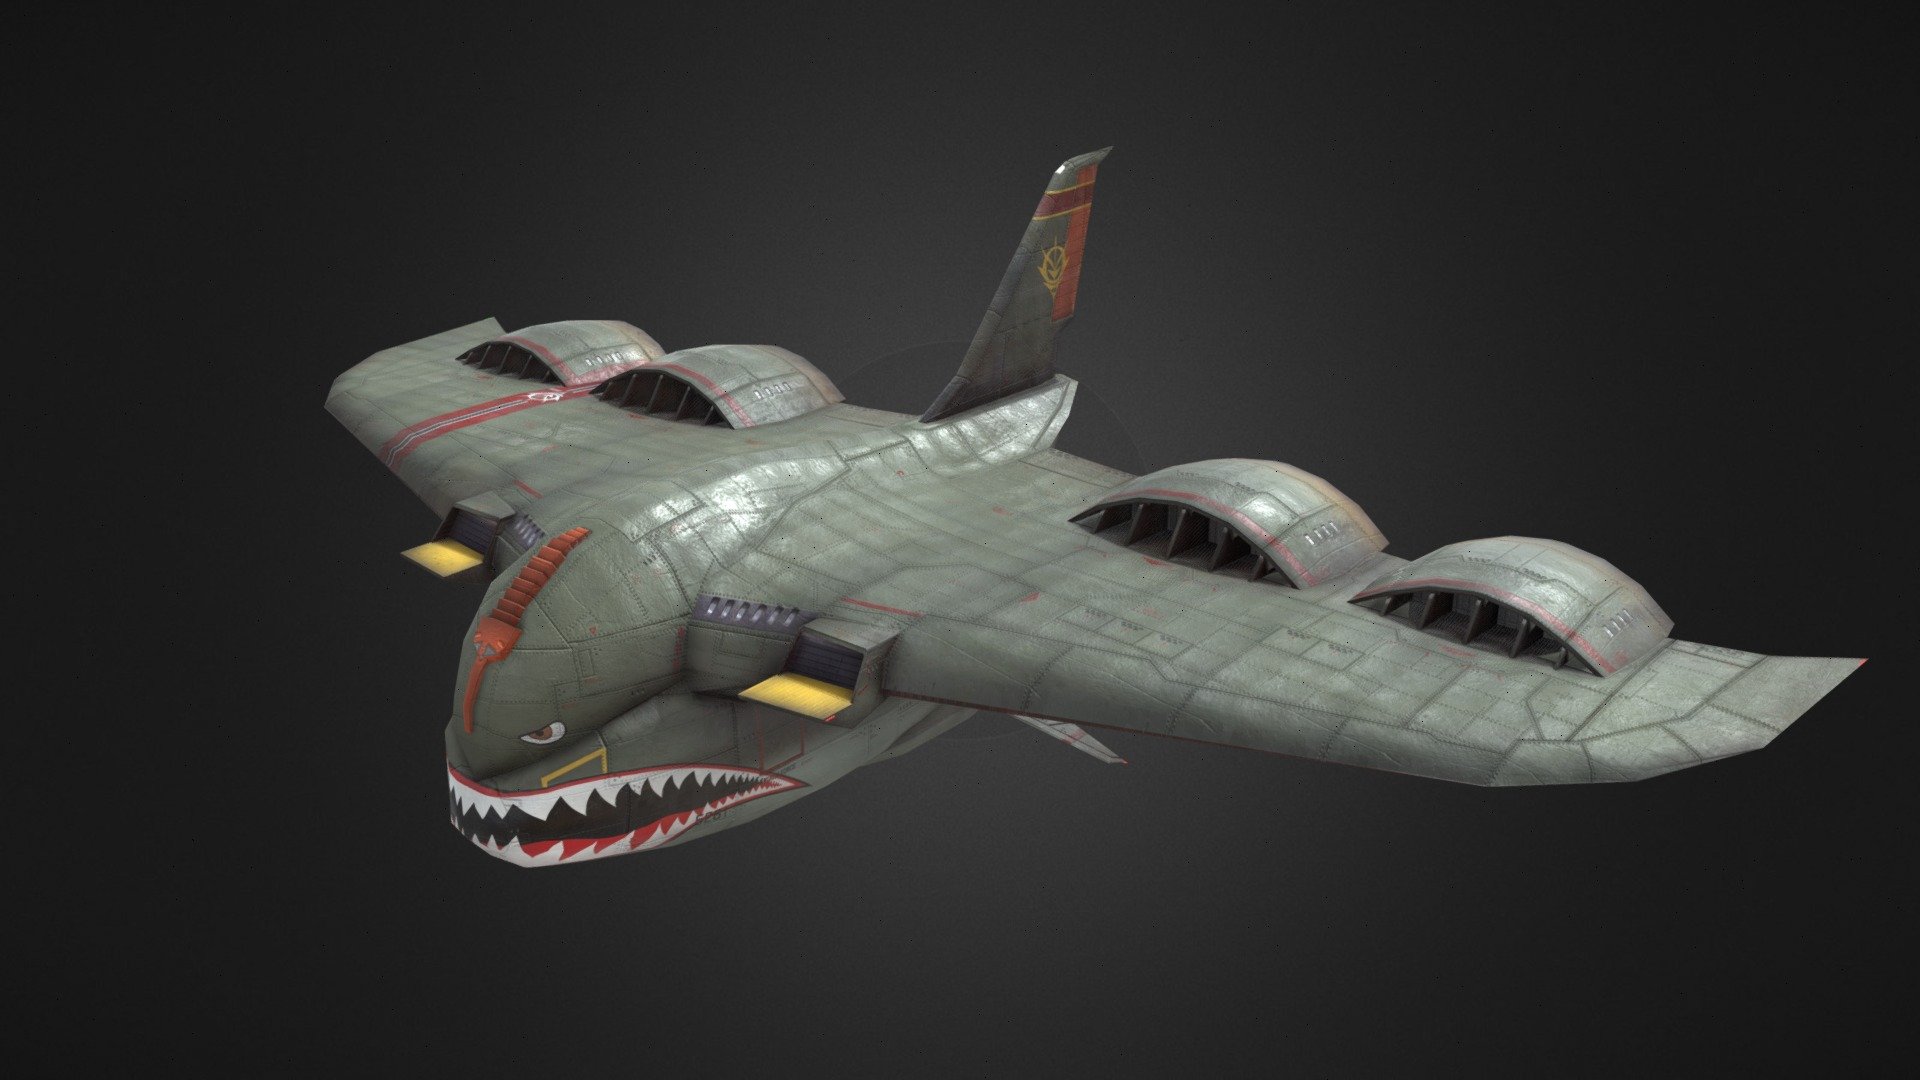 This model was made for One Year War mod of Hearts of Iron IV. Our Mod Steam Home Page https://steamcommunity.com/sharedfiles/filedetails/?id=2064985570 - Gaw Attack Carrier Aircraft Europe Camo - 3D model by One Year War Mod (@hoi4oneyearwar) 3d model